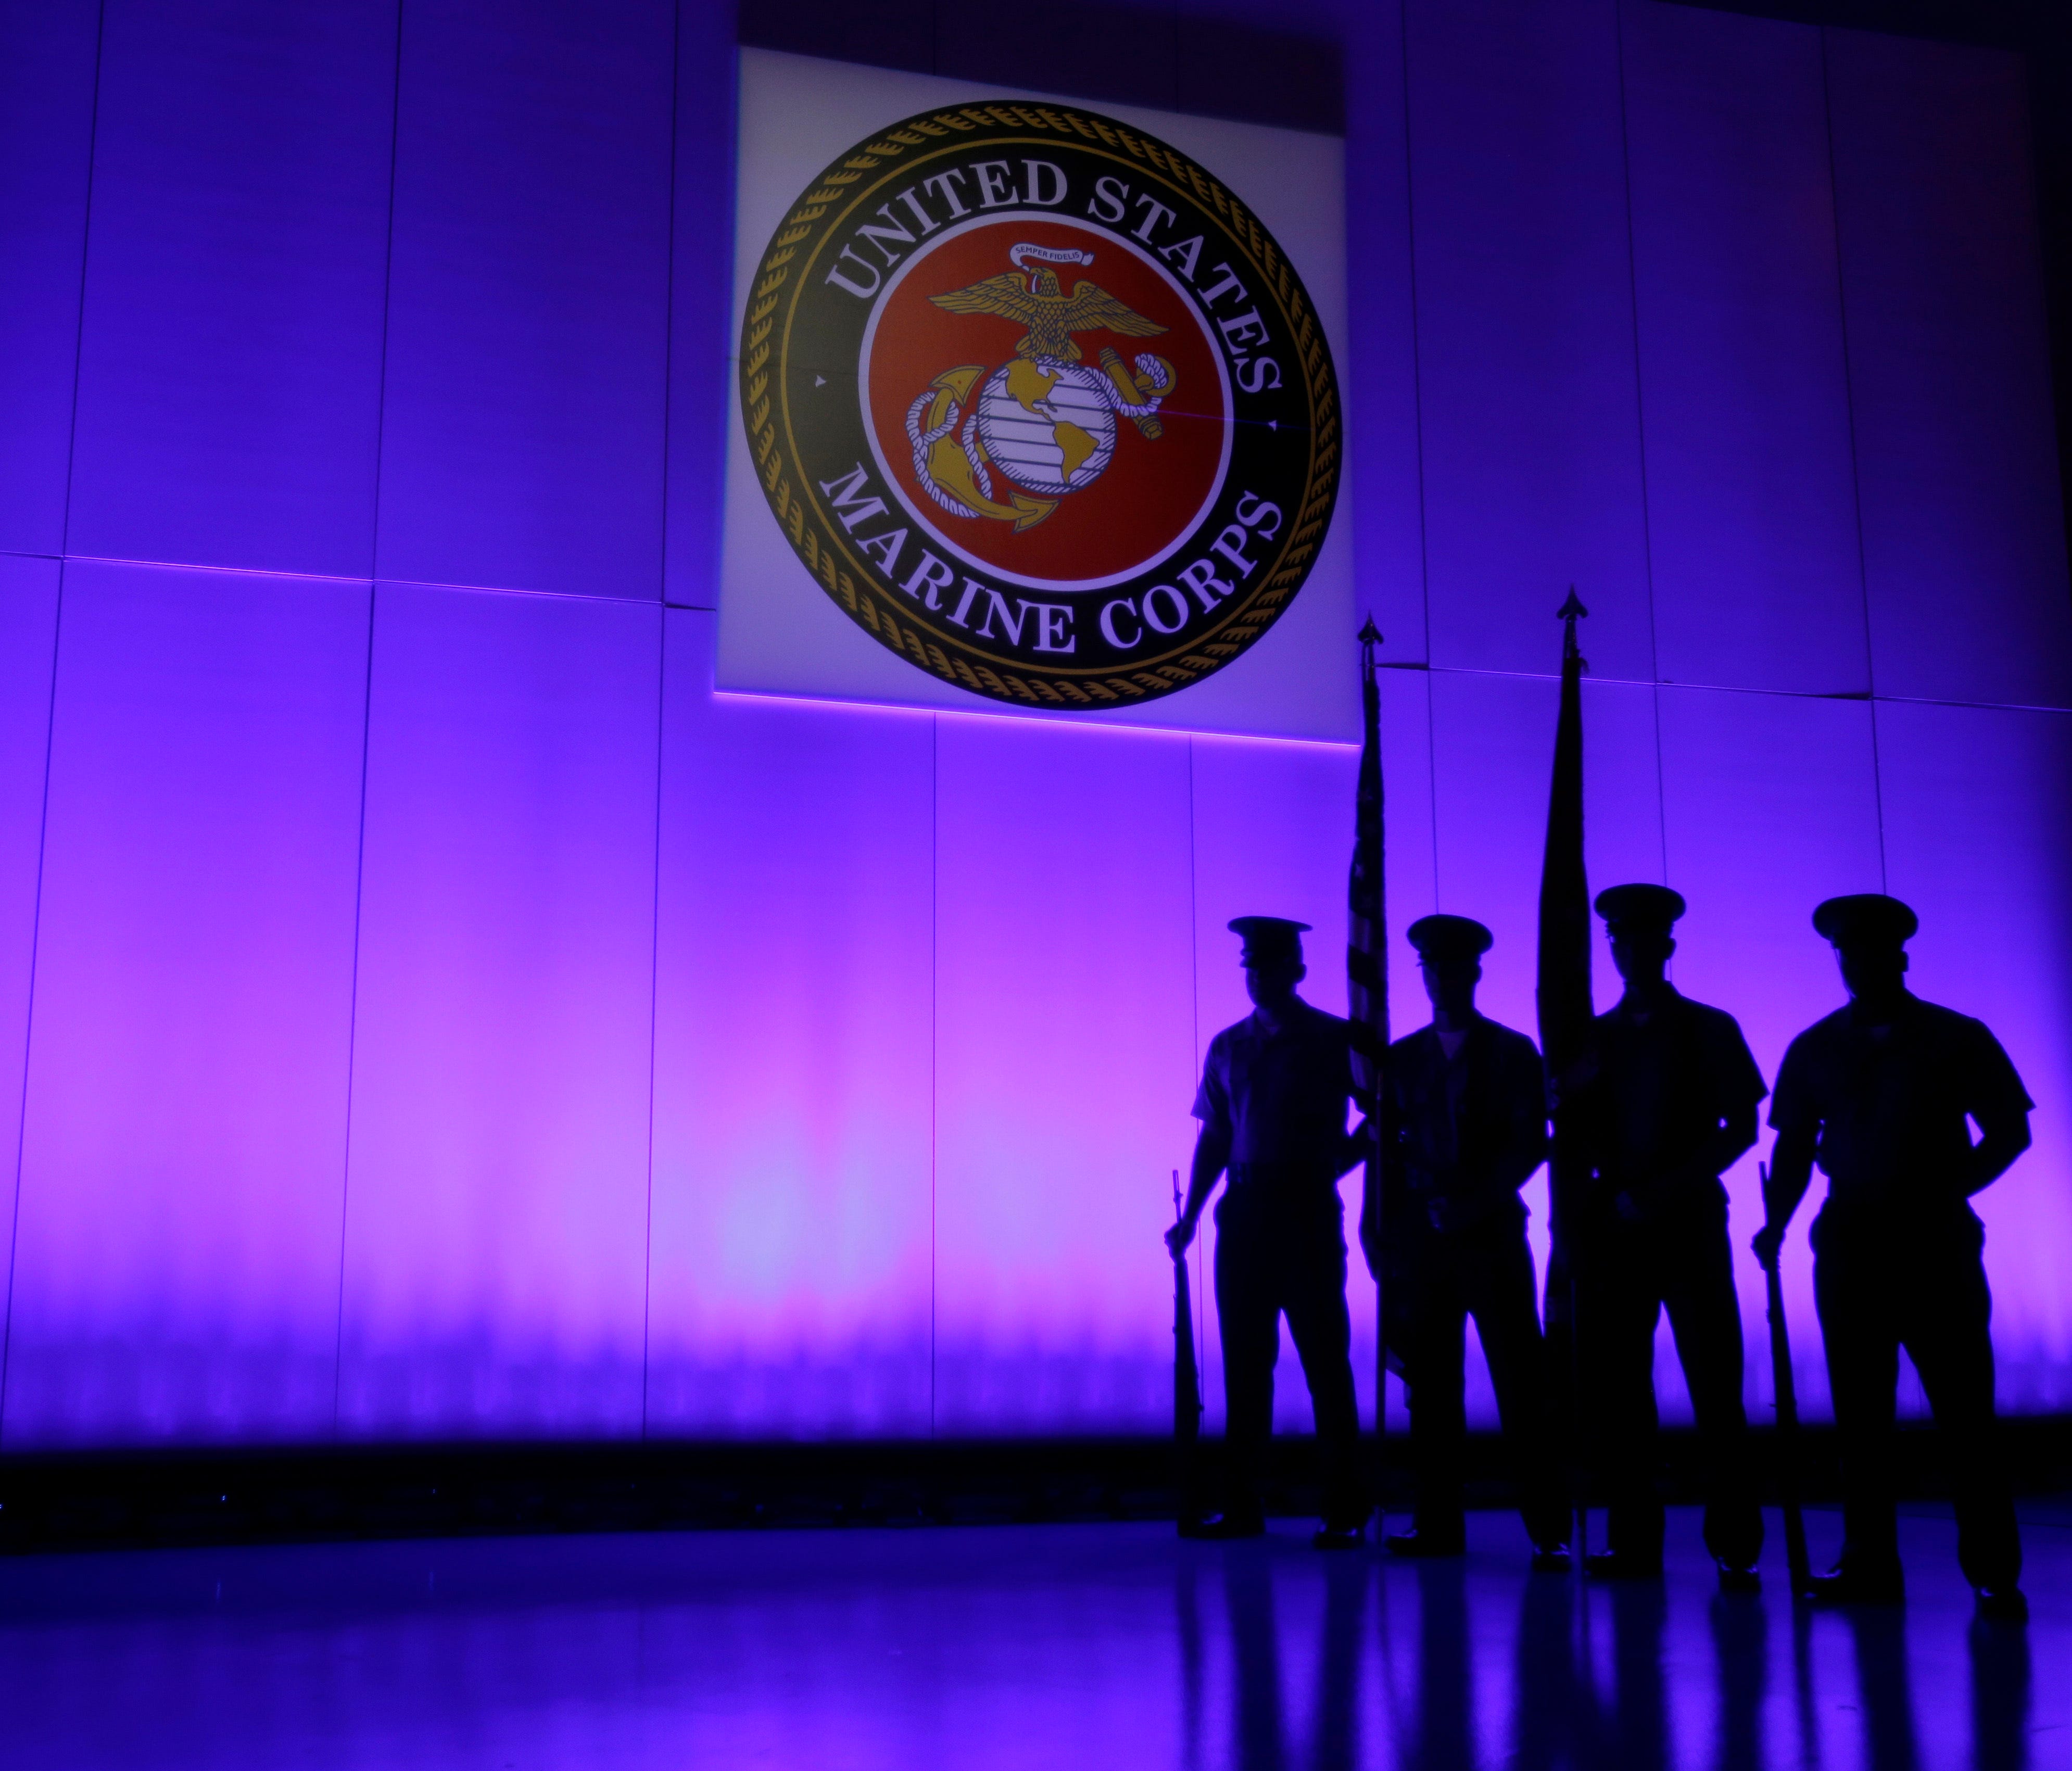 FILE- In this May 5, 2014, file photo, a U.S. Marine Corps Color Guard stands under a Marine Corps emblem in Jupiter, Fla. The Defense Department is investigating reports that some Marines shared naked photographs of female Marines, veterans and othe